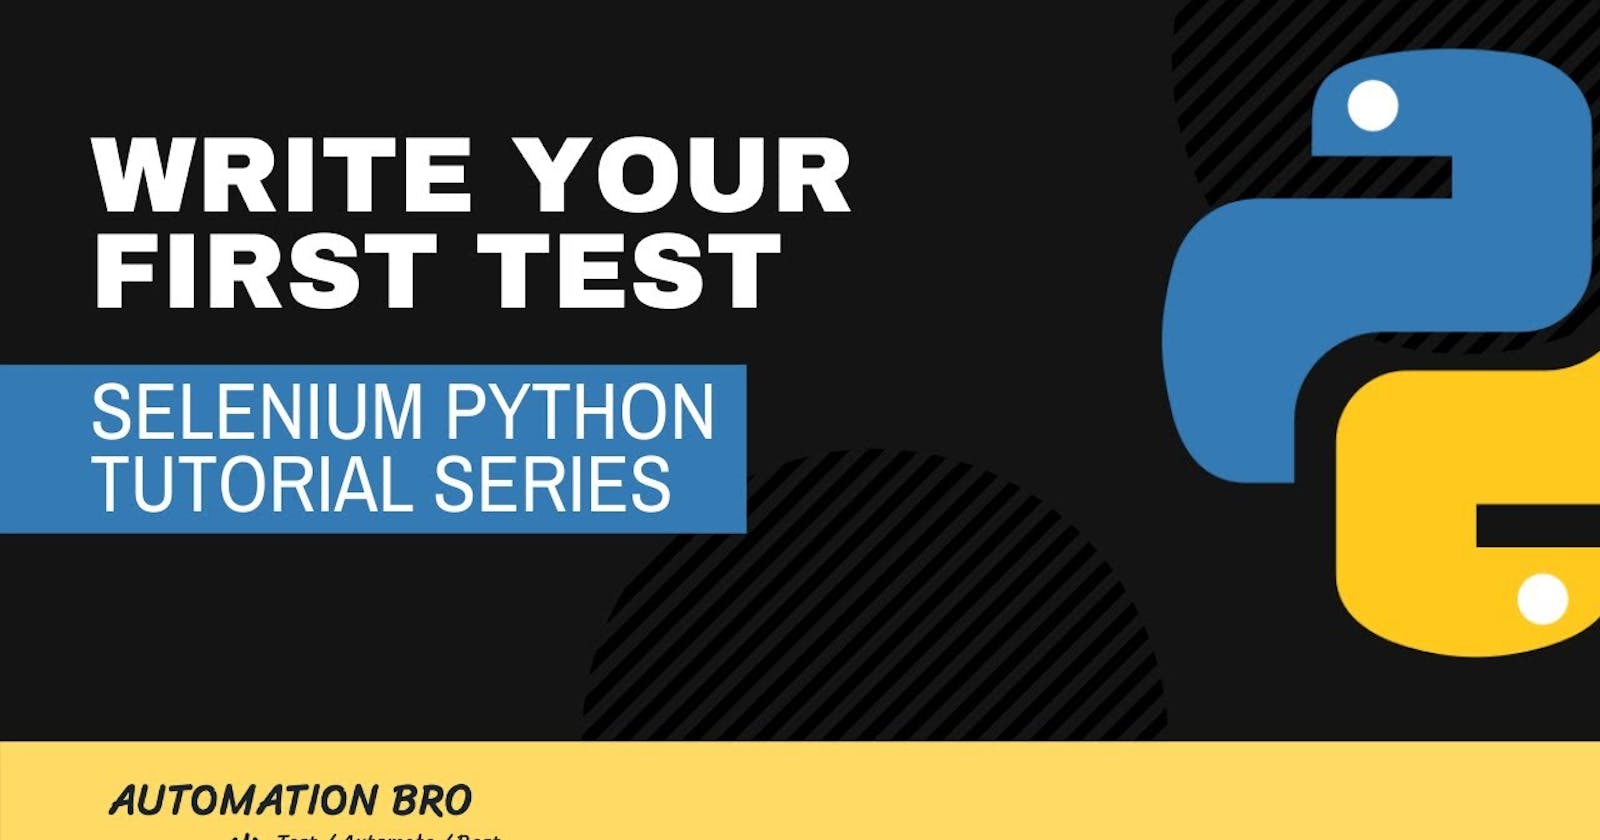 Write your first test in Selenium Python